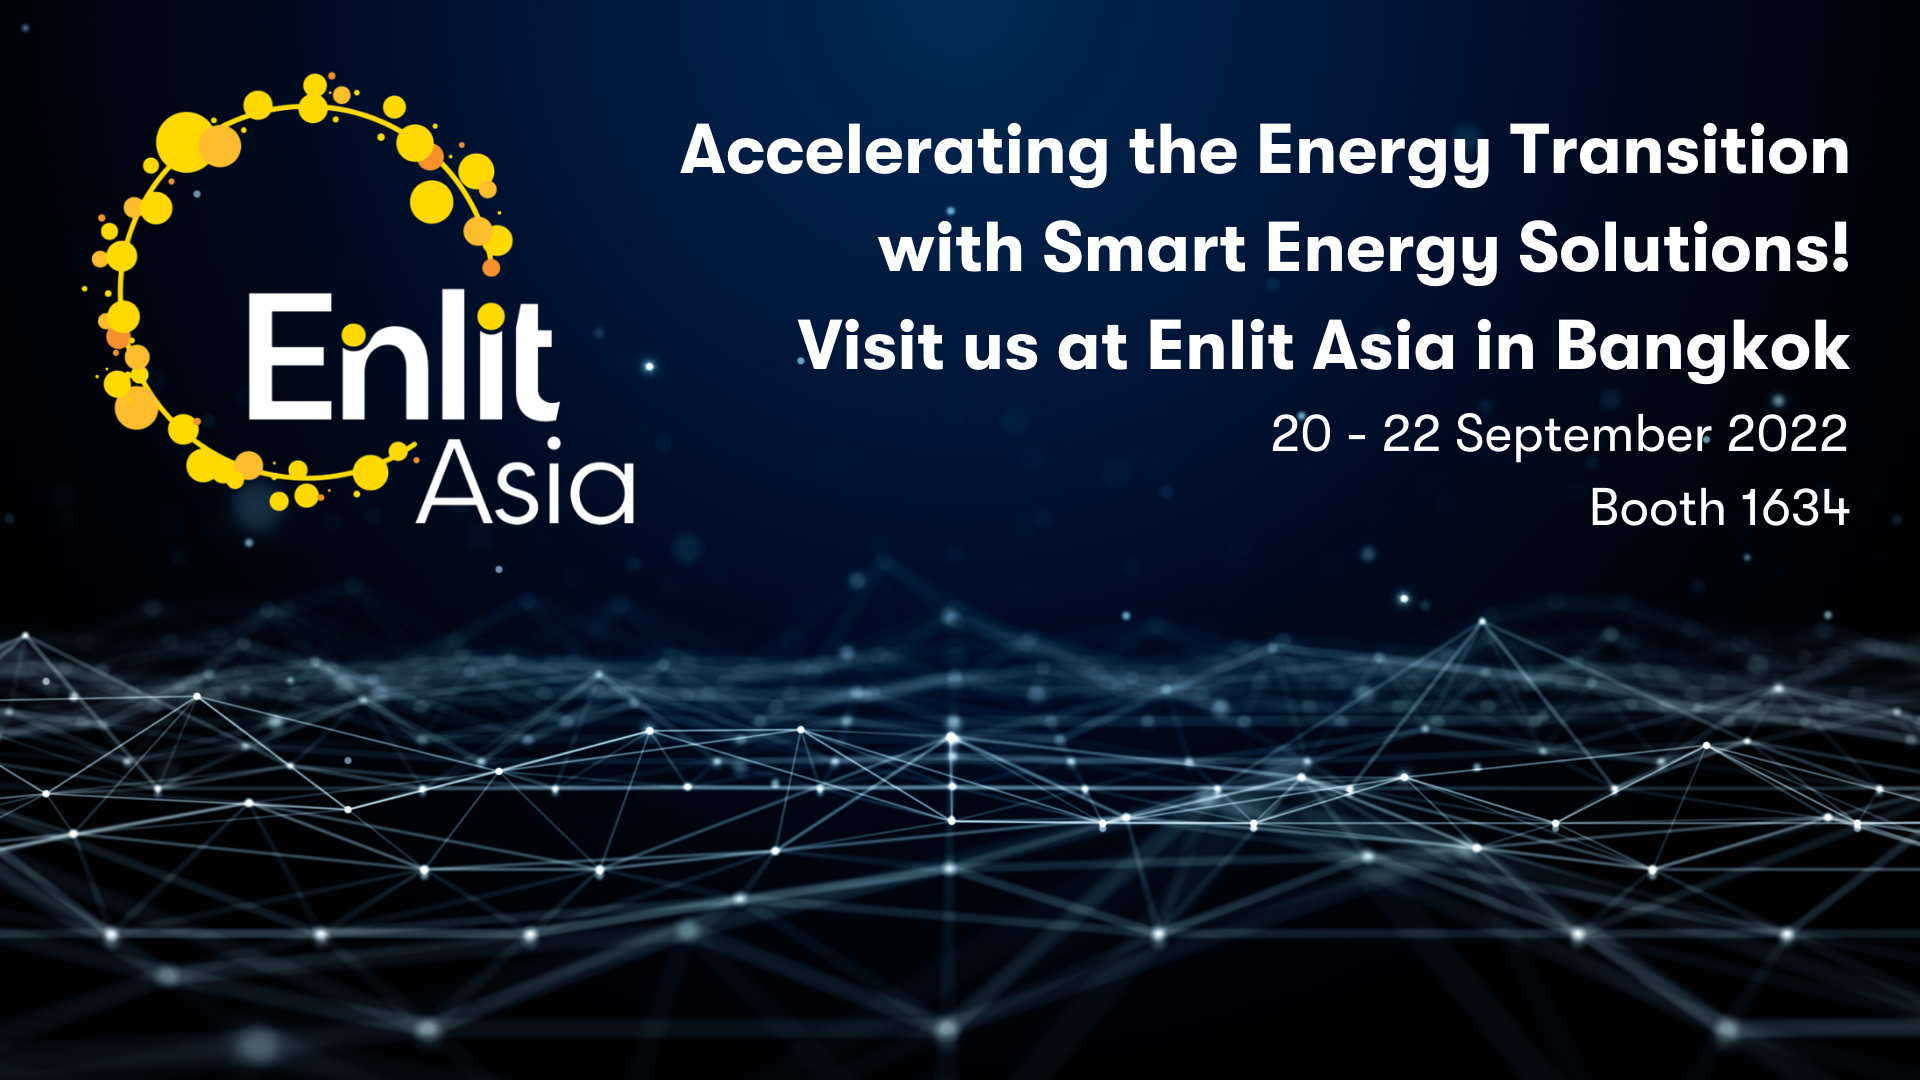 uploads/pics/https://trading.iqony.energy/uploads/pics/Accelerating_the_Energy_Transition_with_Smart_Digital_Solutions_Visit_us_at_Enlit_Asia_in_Bangkok__1__28.png